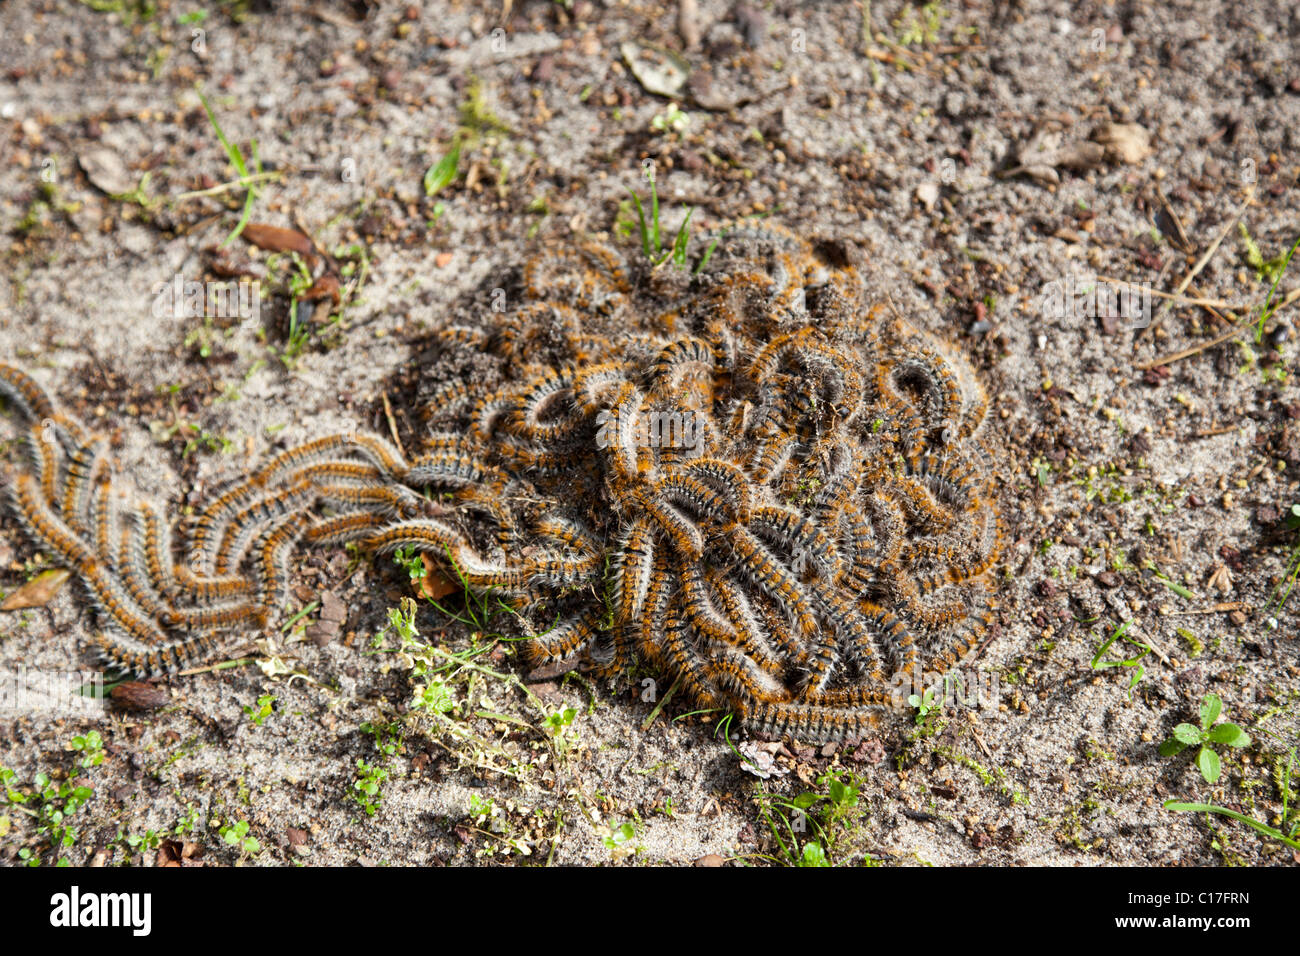 Pine processionary caterpillars migrating to a pupation site (France). Chenilles processionnaires du pin migrant (France). Stock Photo